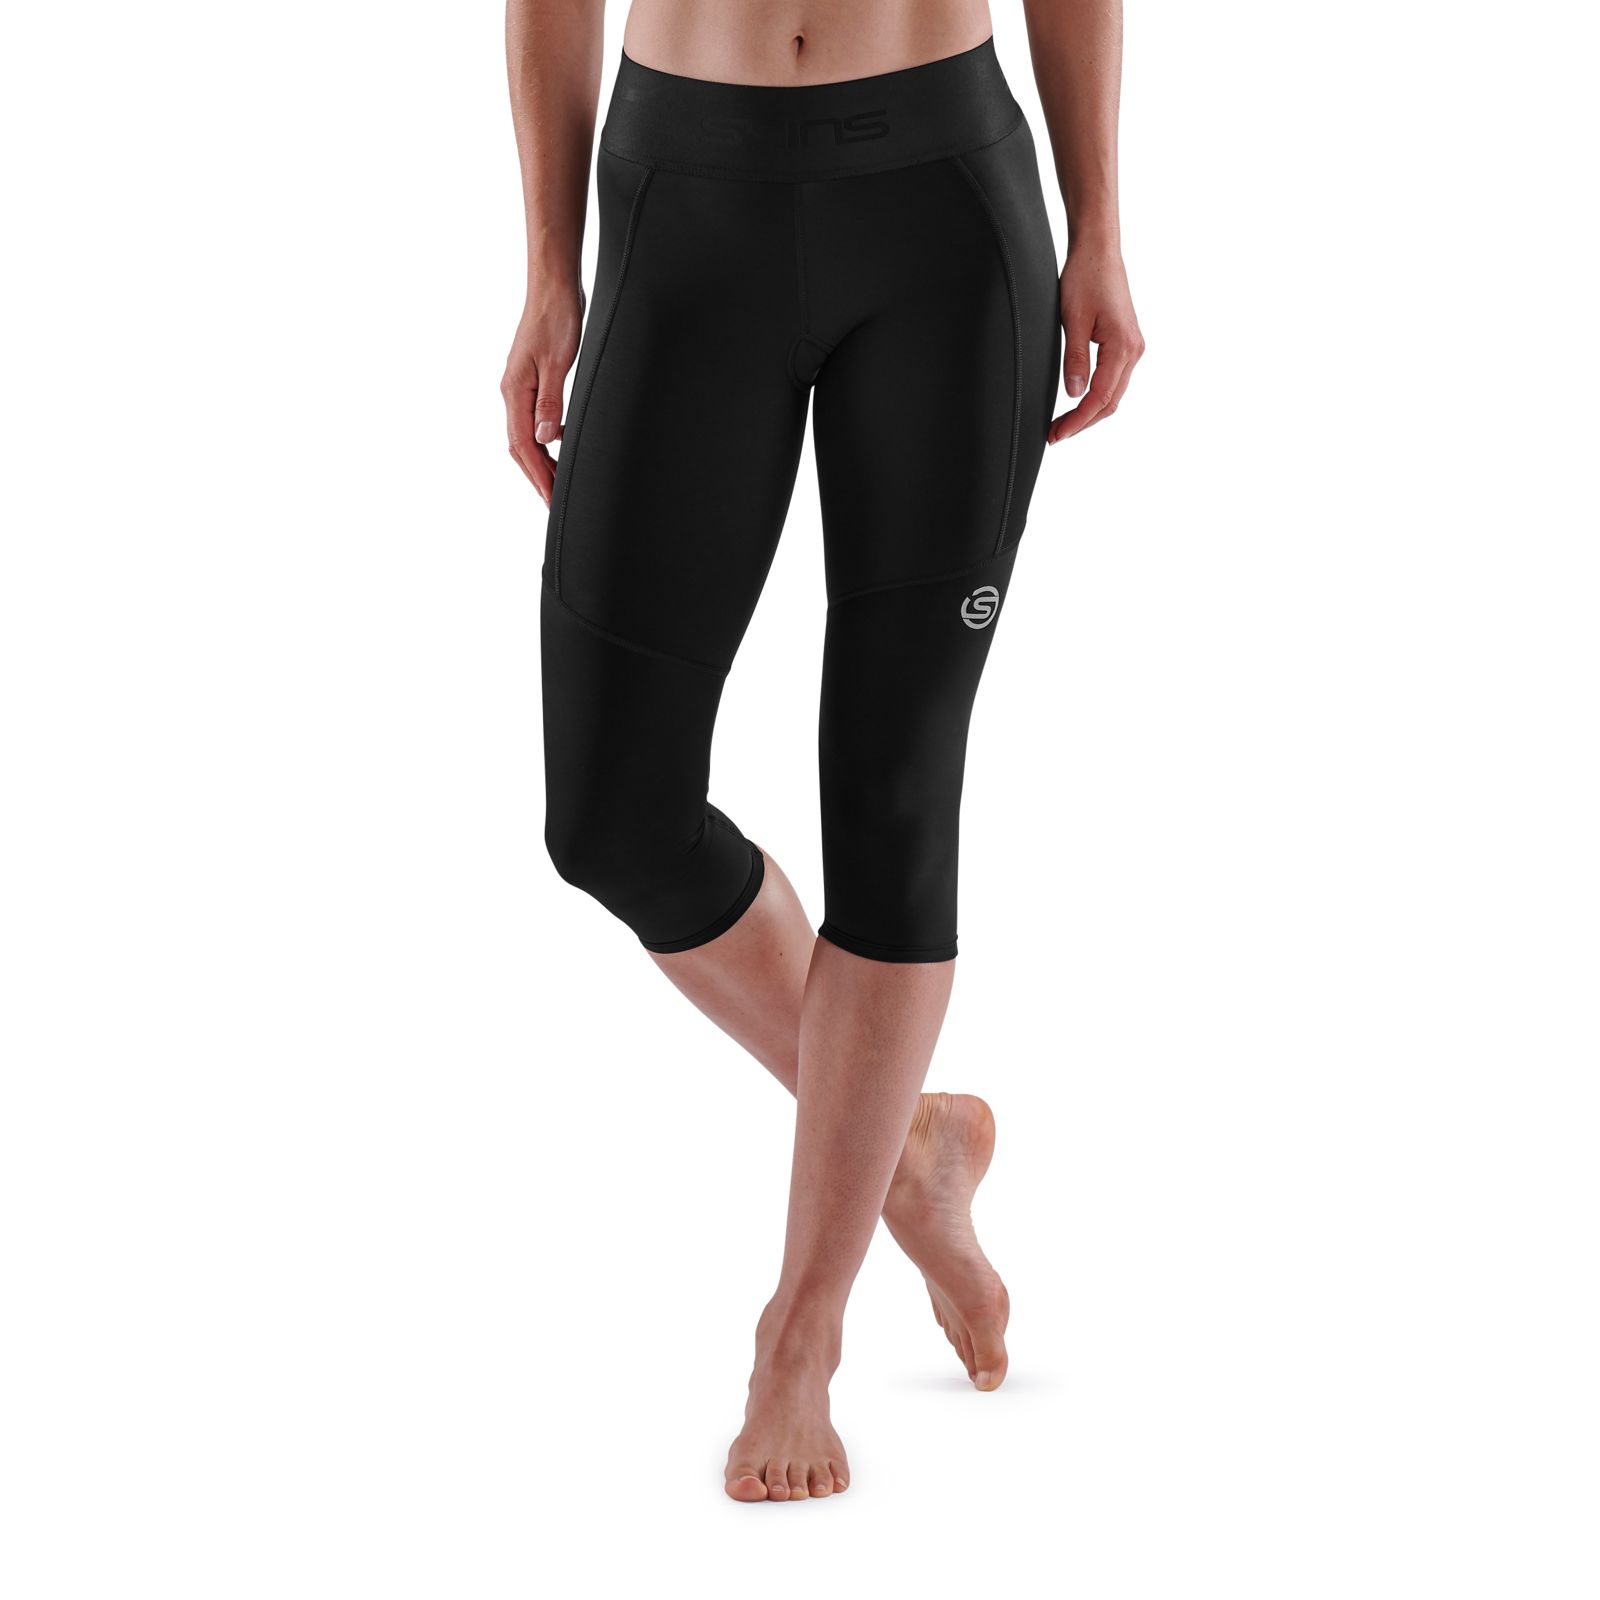 SKINS SERIES-3 WOMEN'S THERMAL 3/4 TIGHTS BLACK - SKINS Compression USA